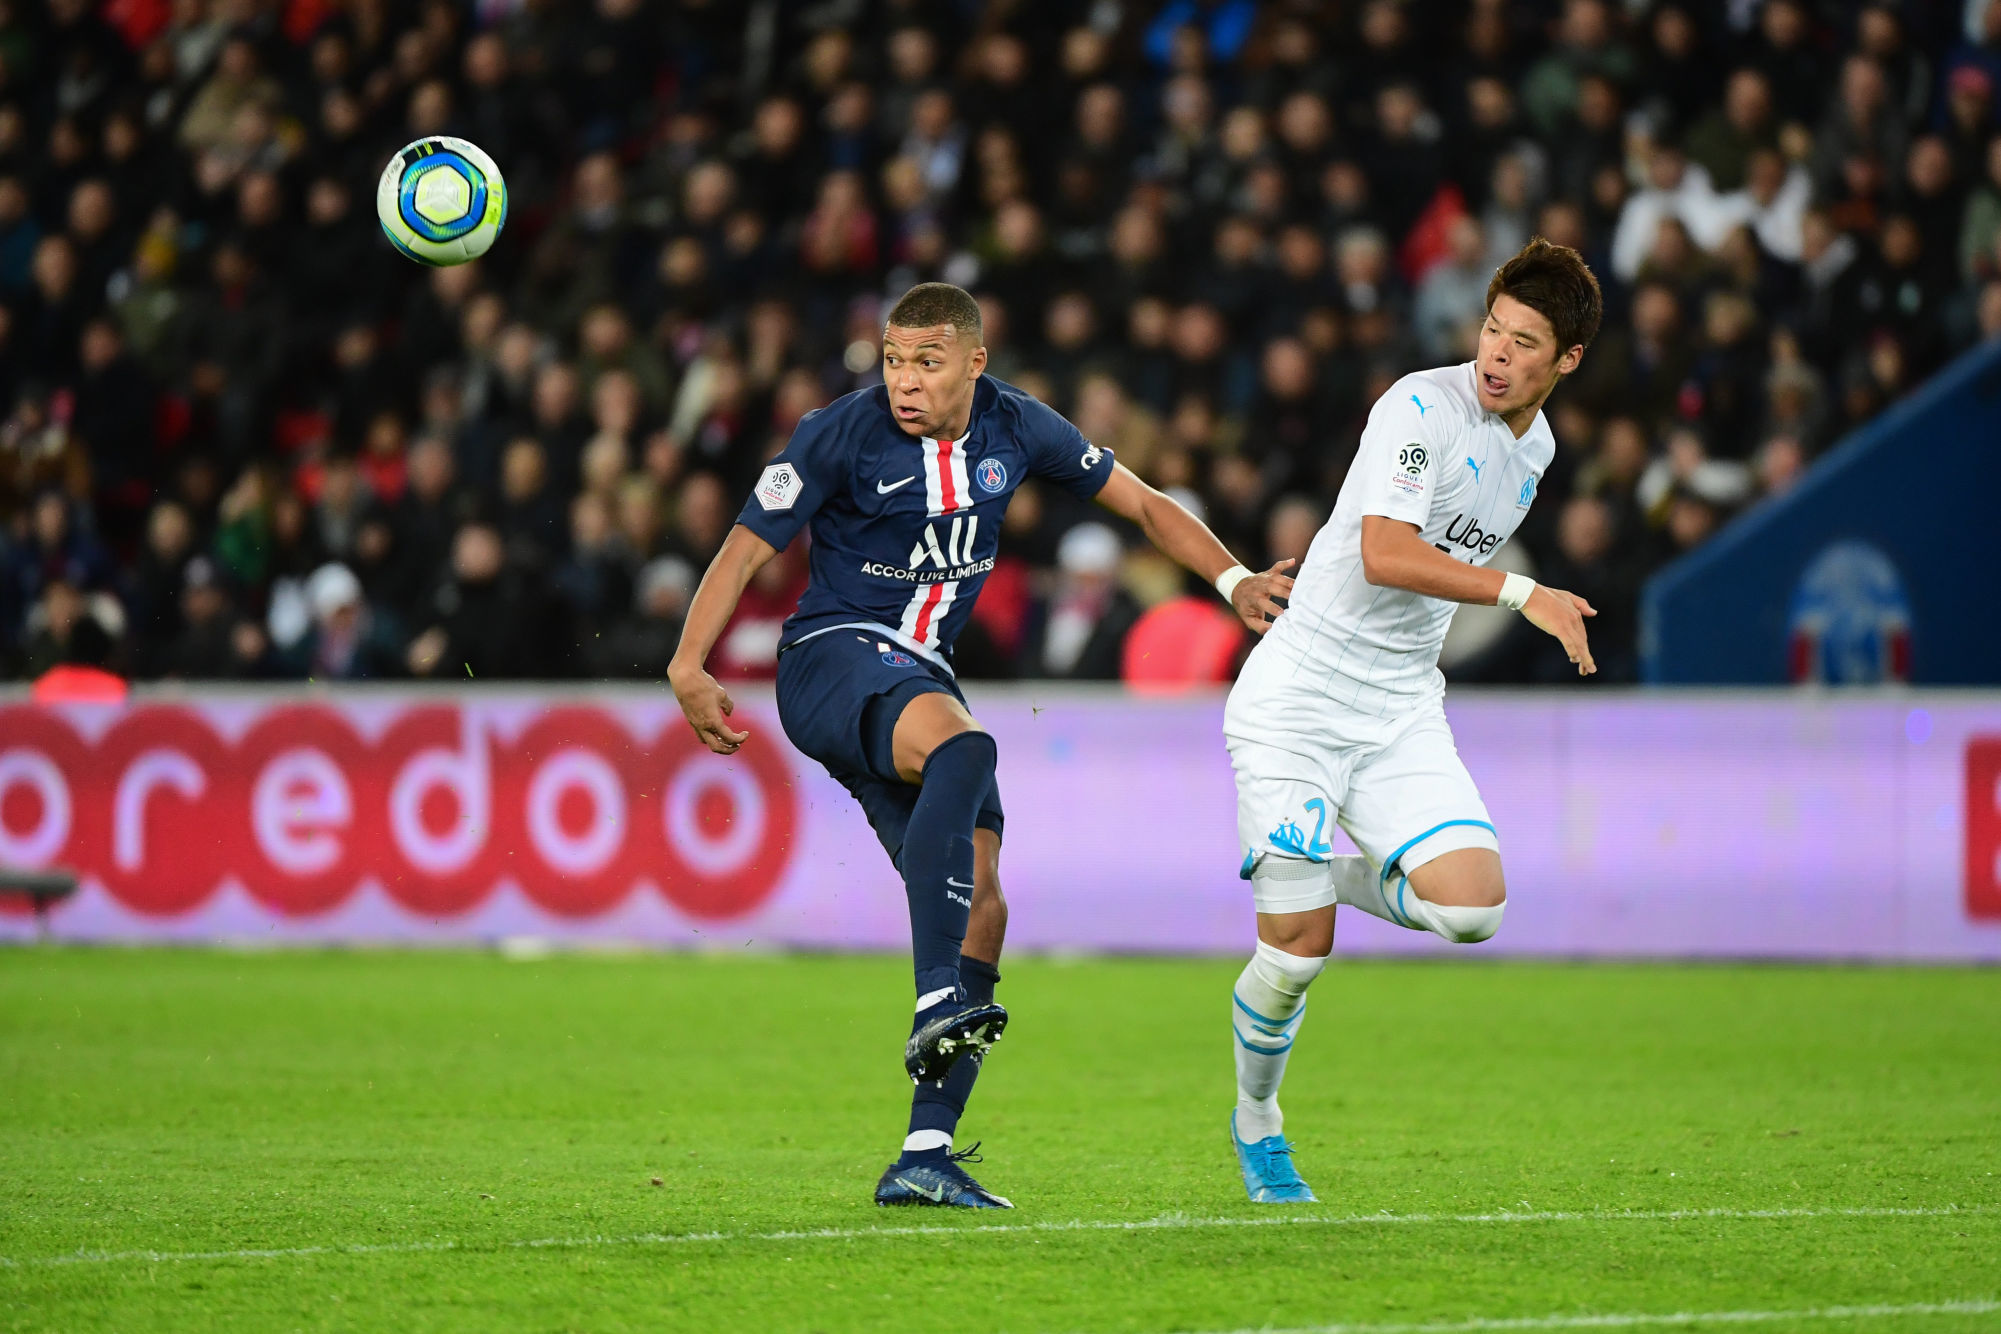 (L-R) Kylian MBAPPE of PSG and Hiroki SAKAI of Marseille during the Ligue 1 match between Paris Saint Germain and Marseille at Parc des Princes on October 27, 2019 in Paris, France. (Photo by Dave Winter/Icon Sport) - Kylian MBAPPE - Hiroki SAKAI - Parc des Princes - Paris (France)